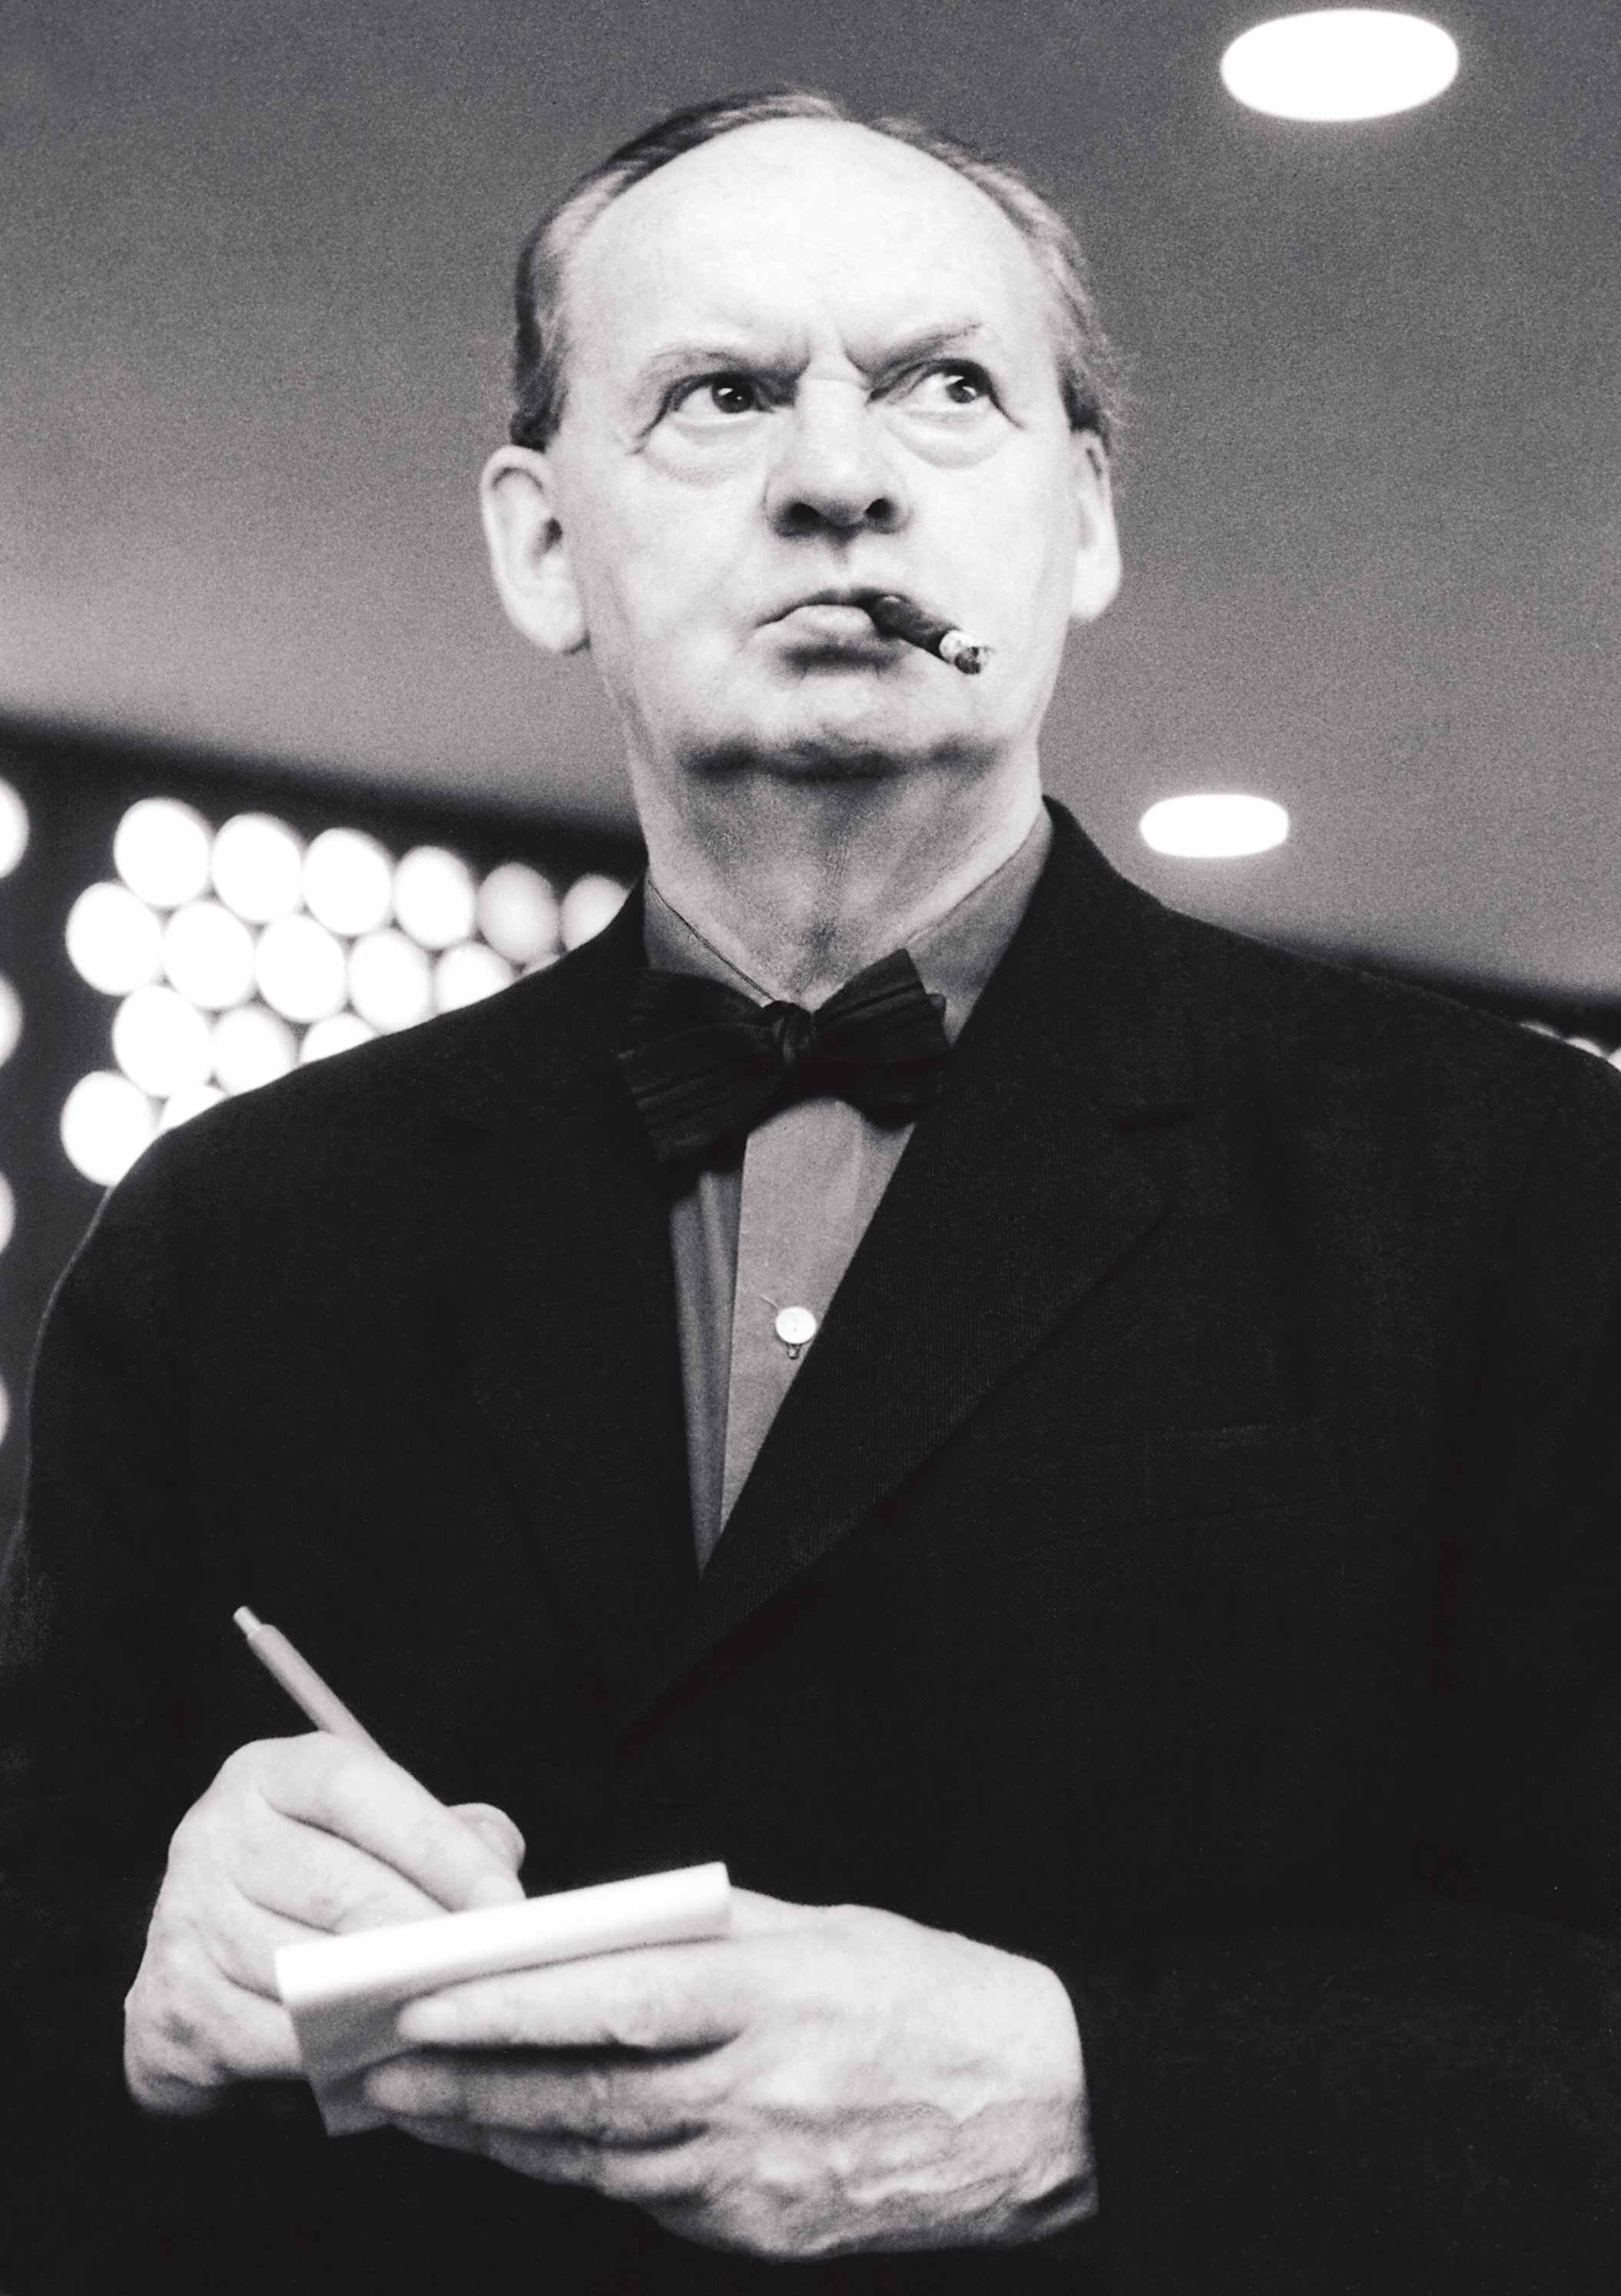 Hans Scharoun with a cigarette in his mouth and a note pad and pencil in his hands.